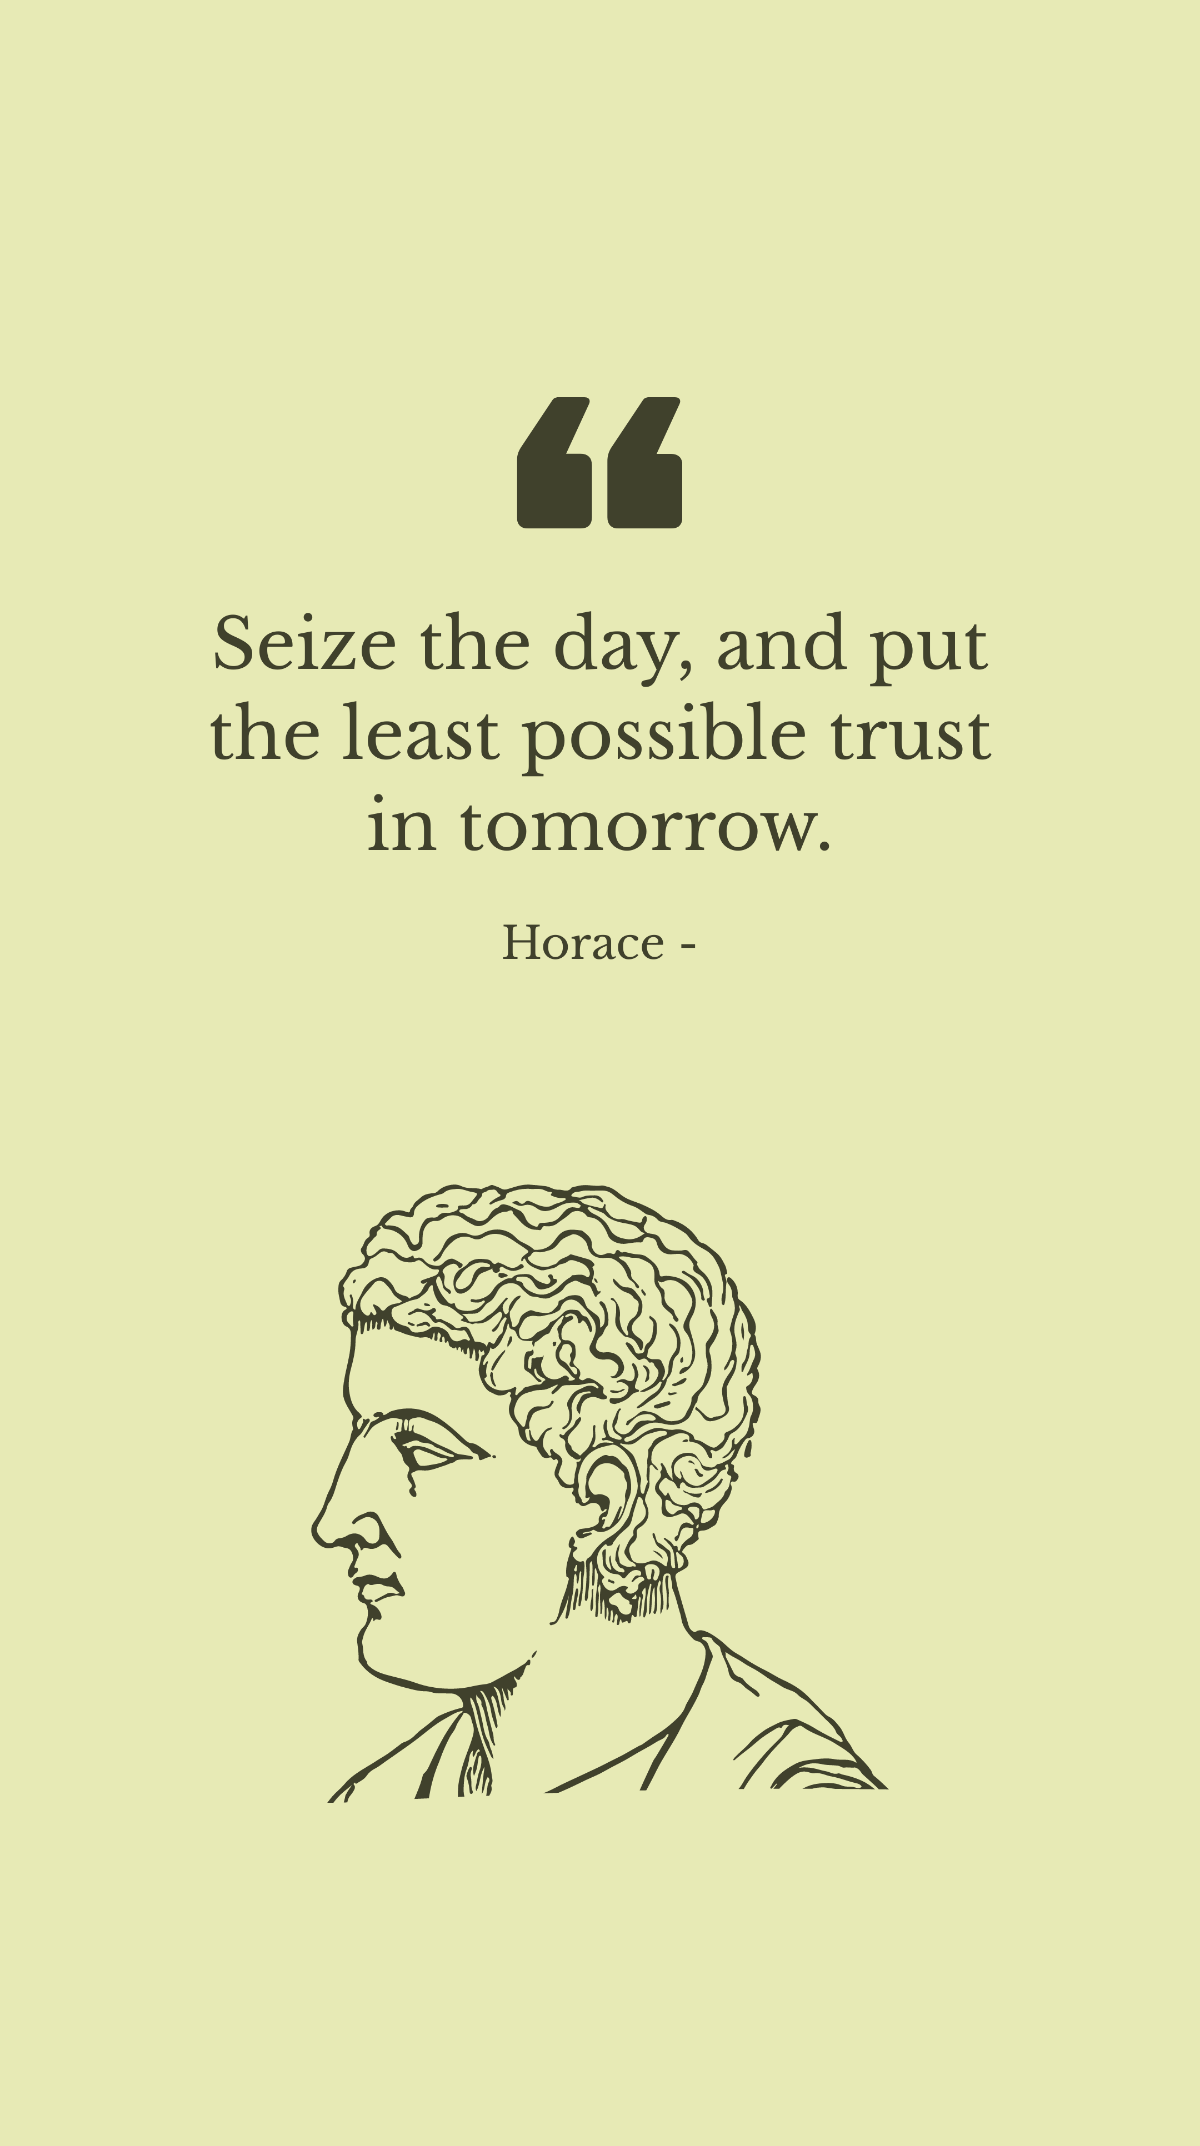 Horace - Seize the day, and put the least possible trust in tomorrow. Template